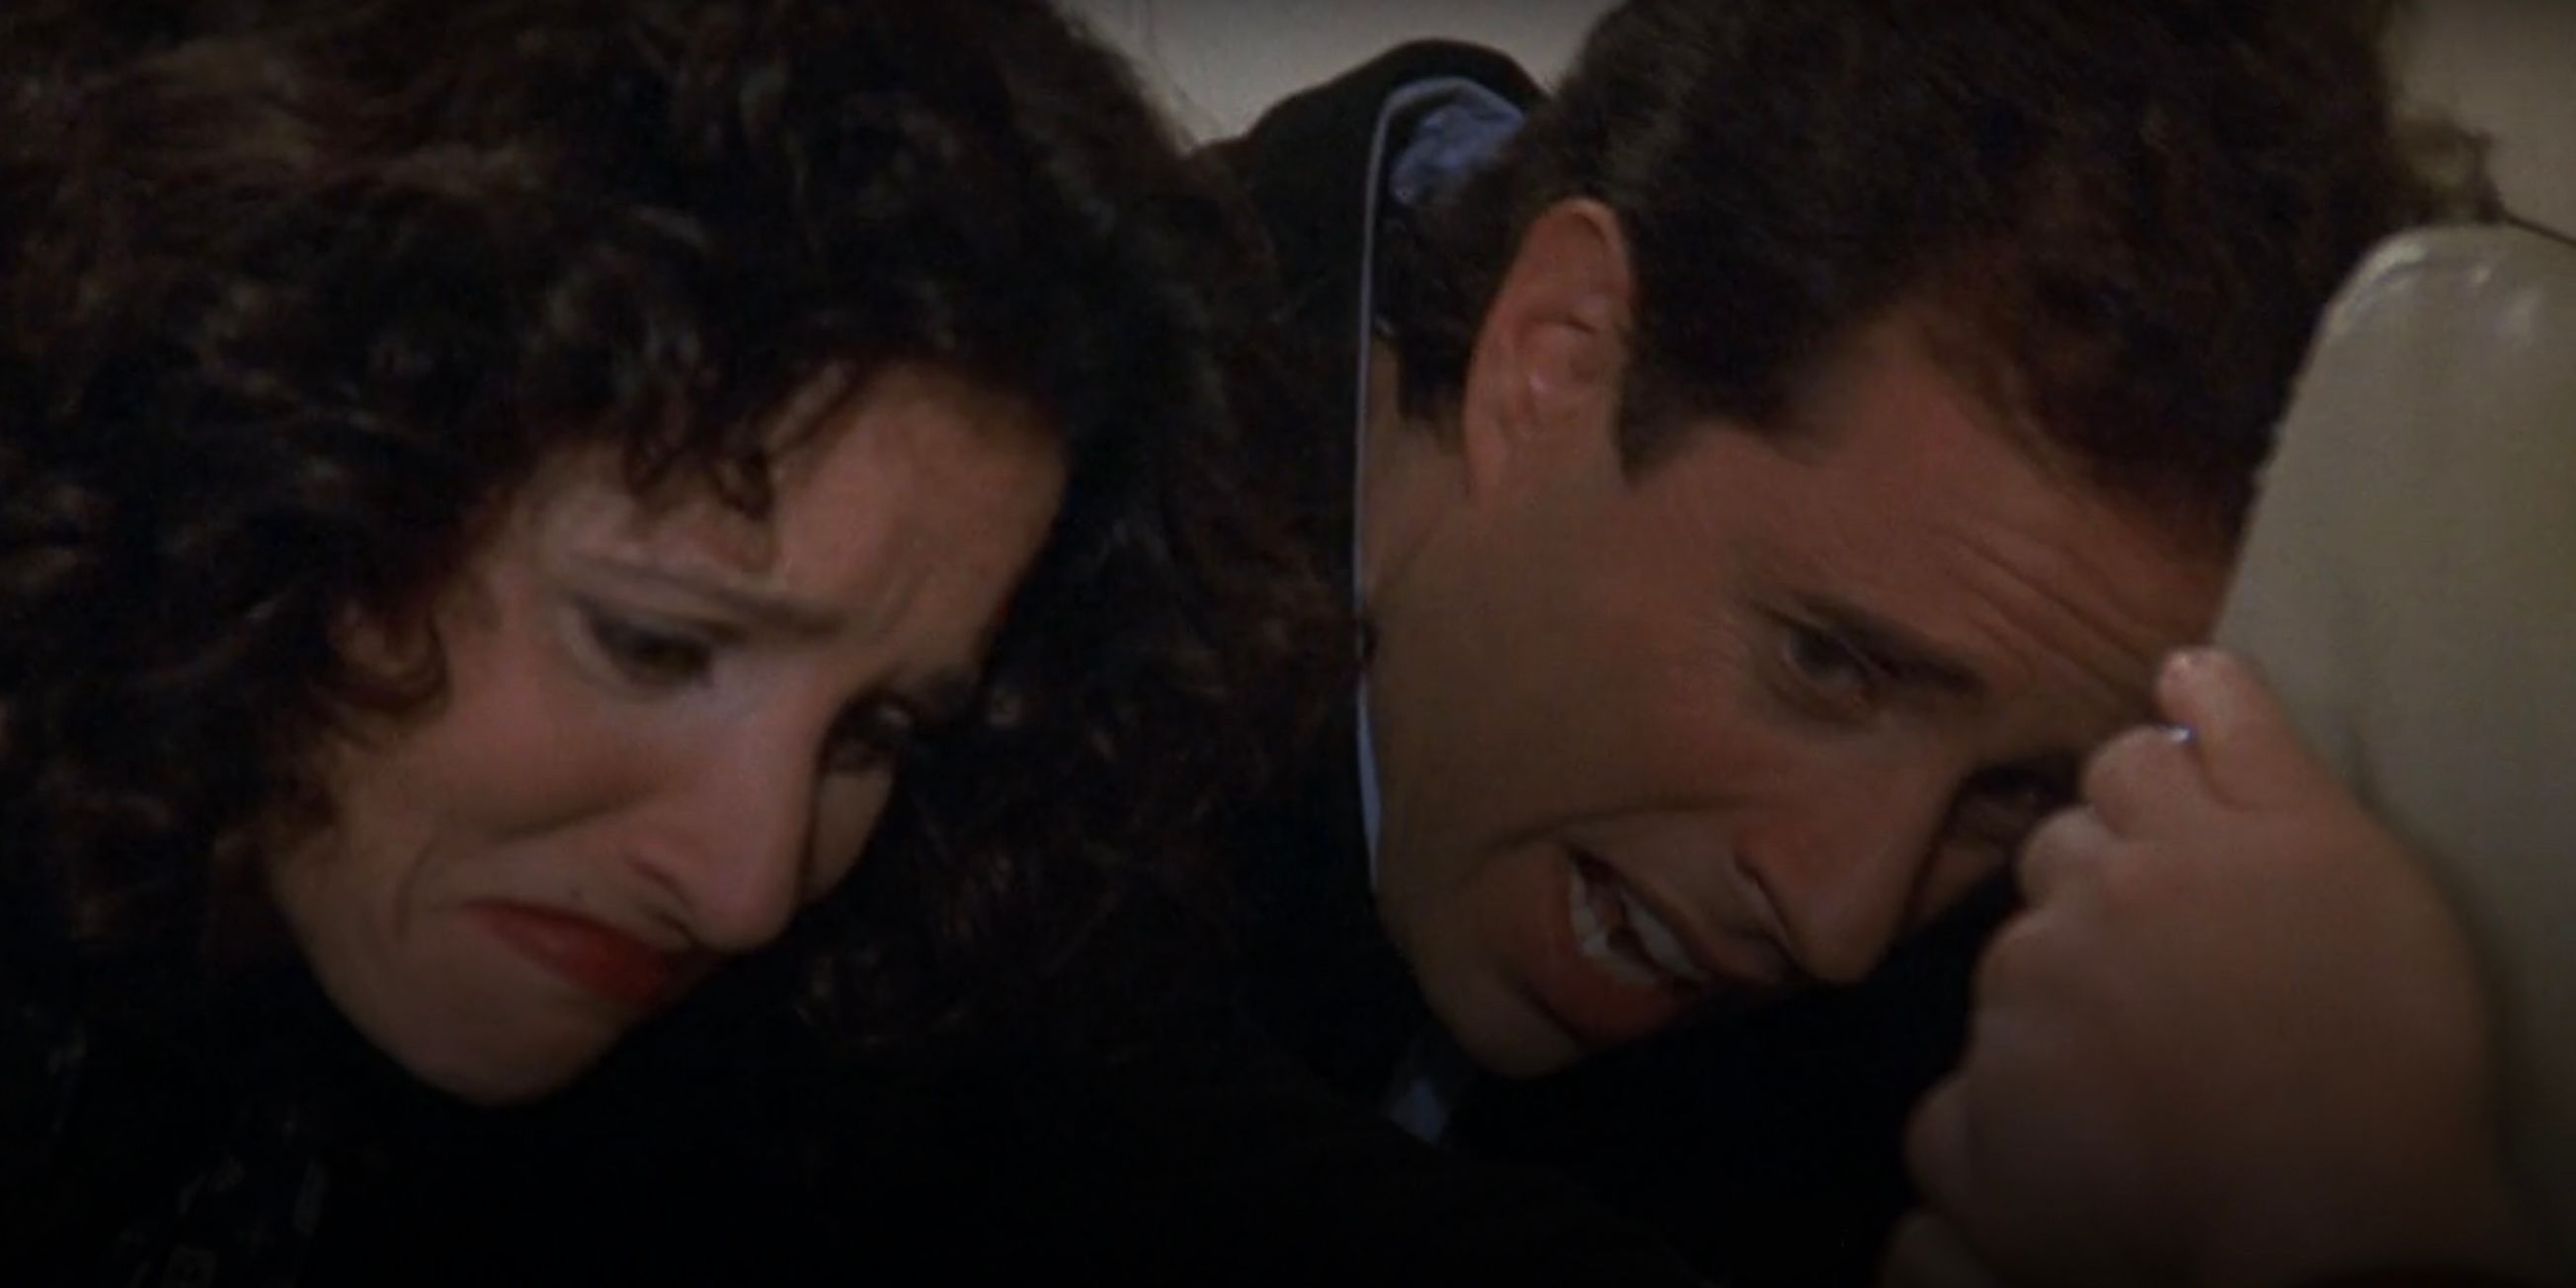 The plane almost crashes in Seinfeld